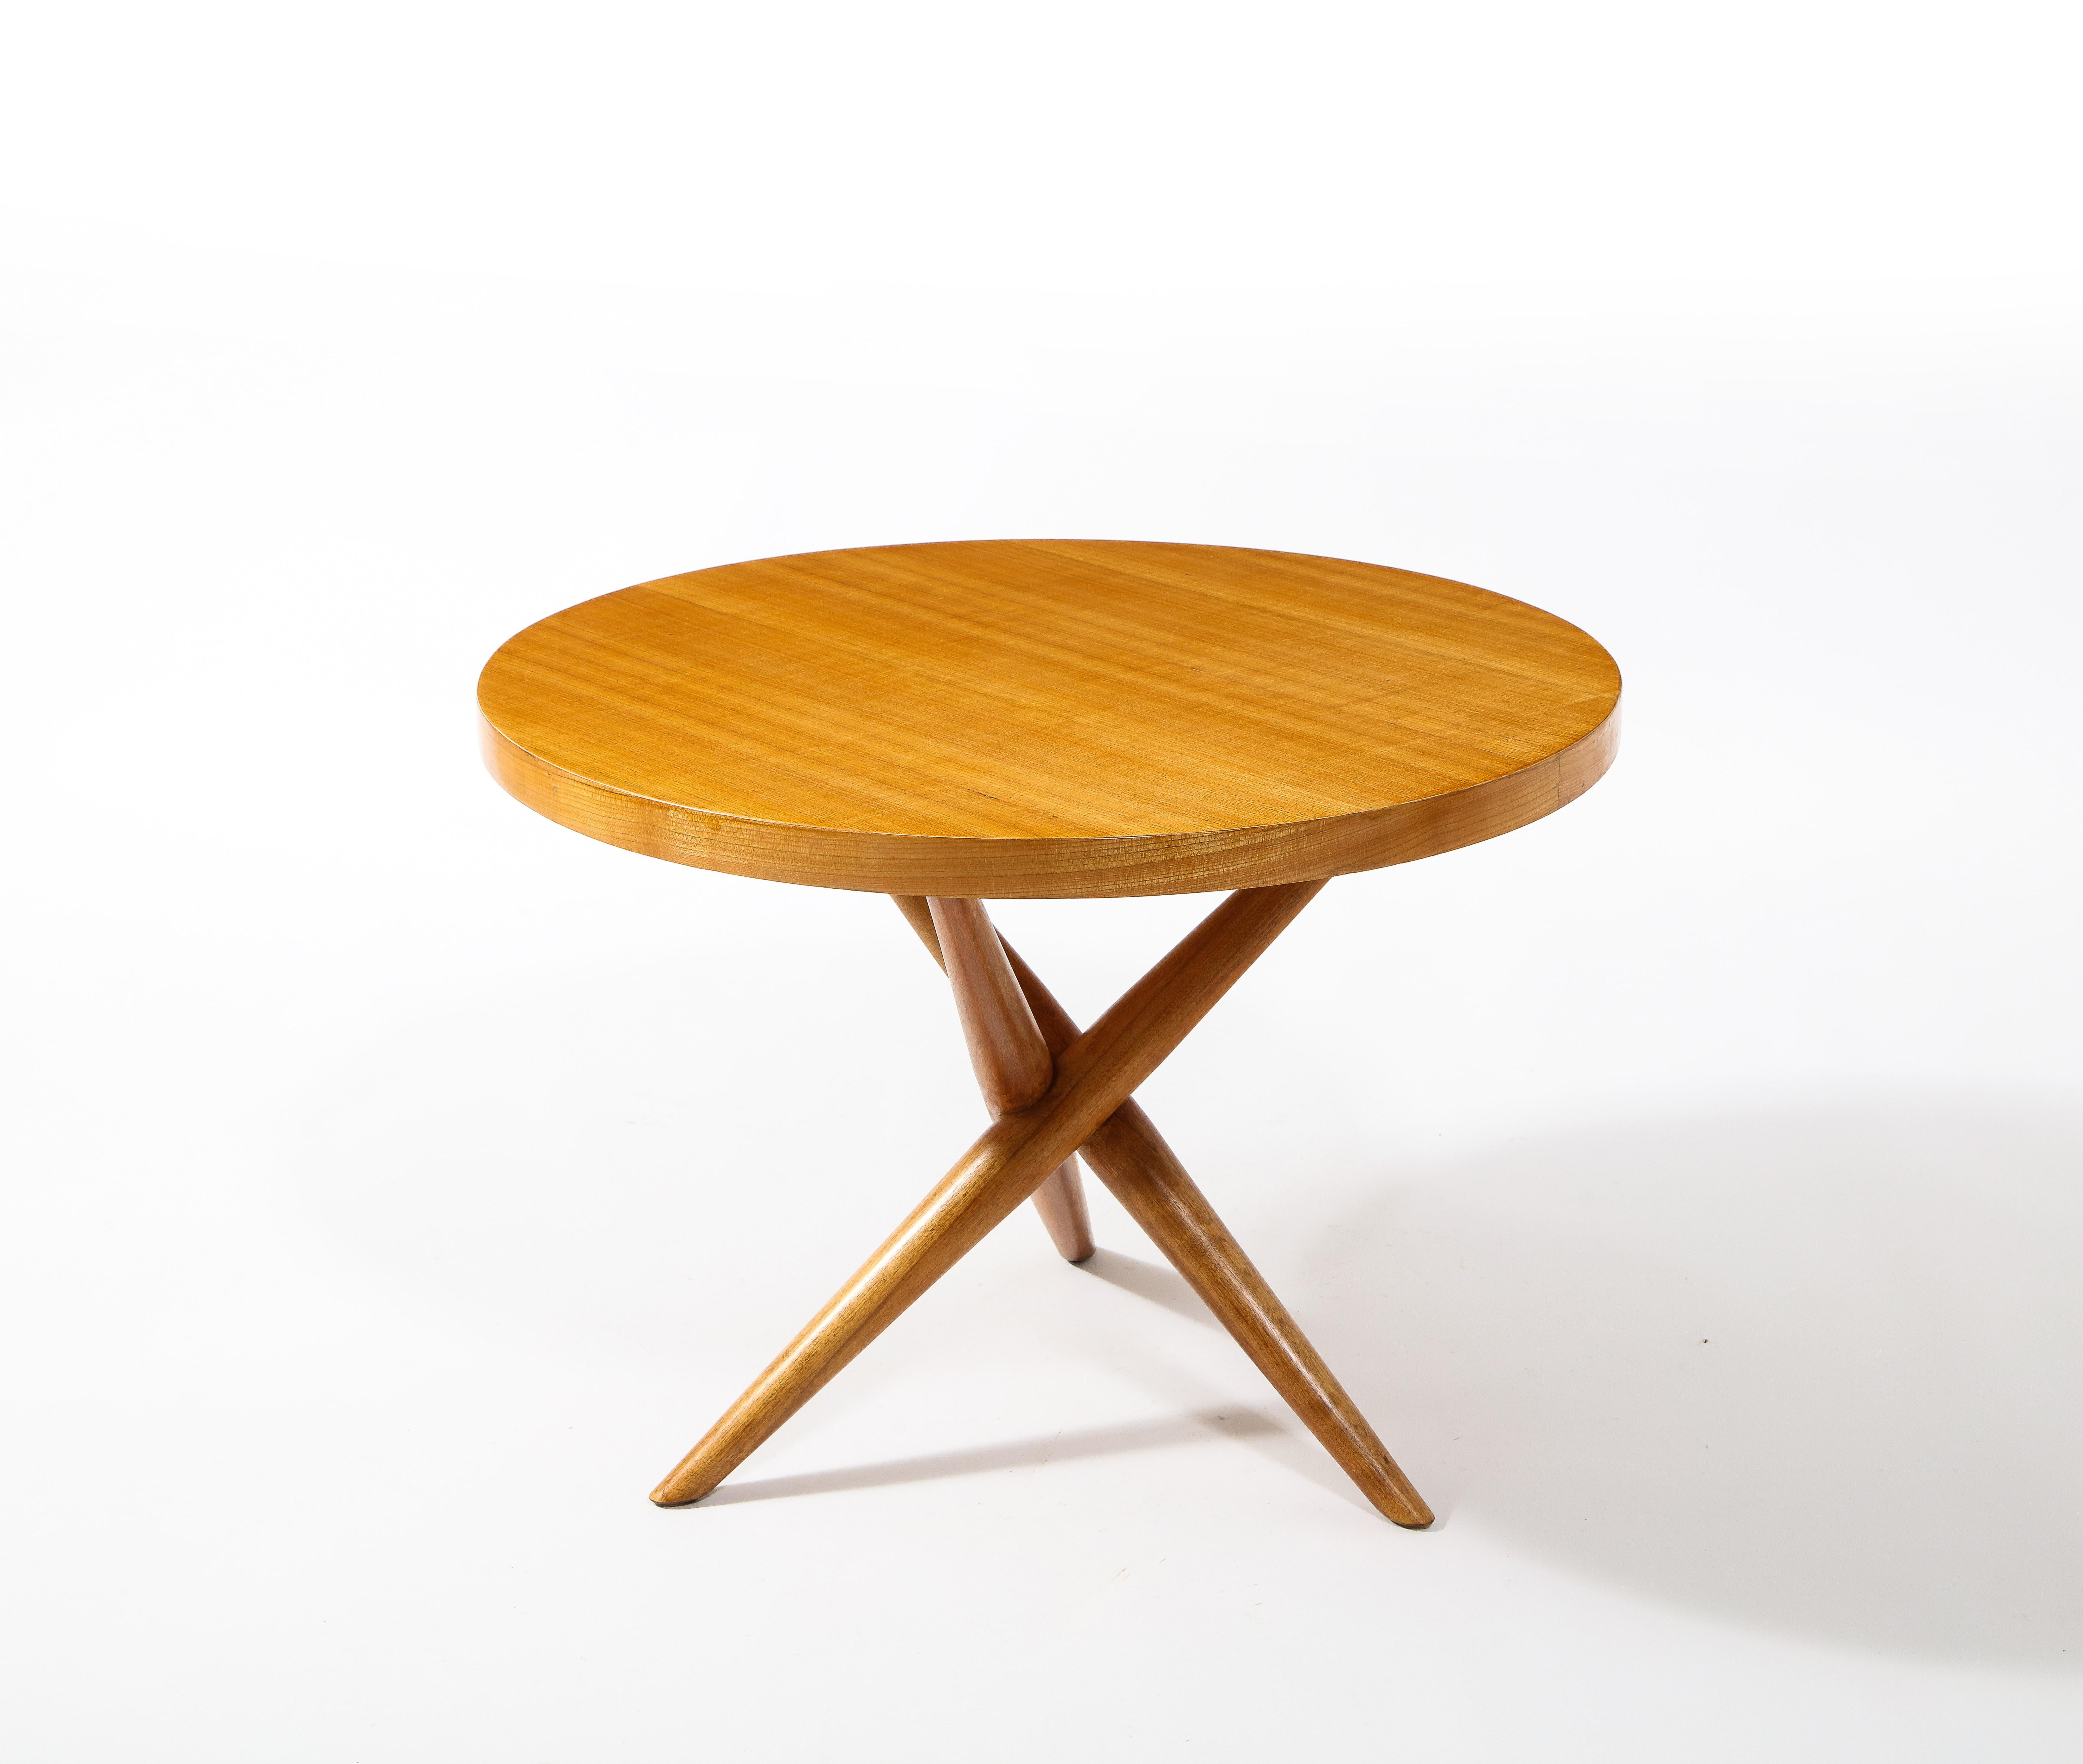 An early Robsjohn Gibbings tripod table for Widdicomb, the veneer is quite different than the usual plain walnut and it retains its original finish.